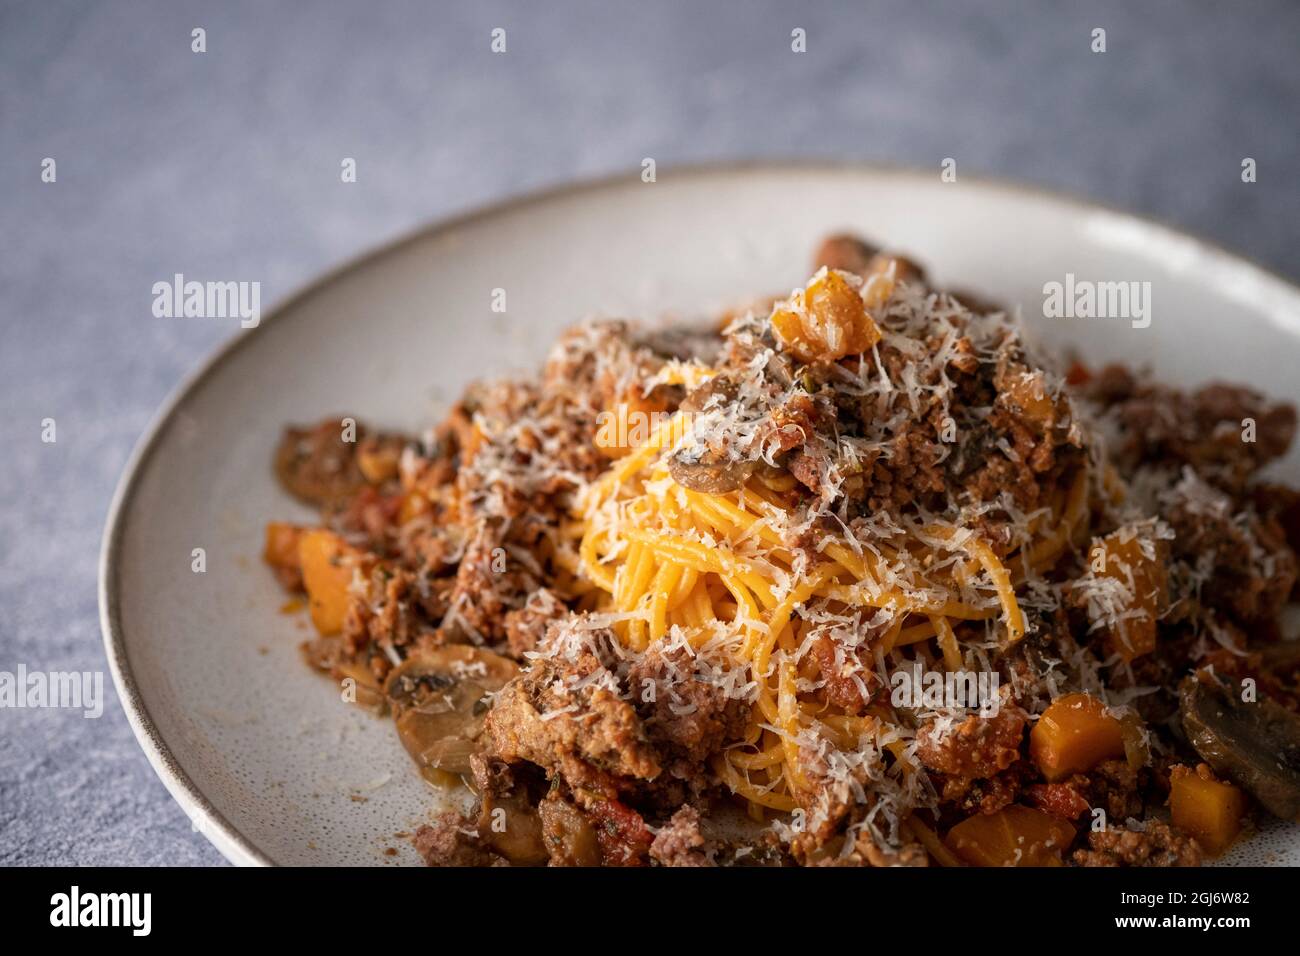 Spaghetti bolognese with permesan cheese Stock Photo